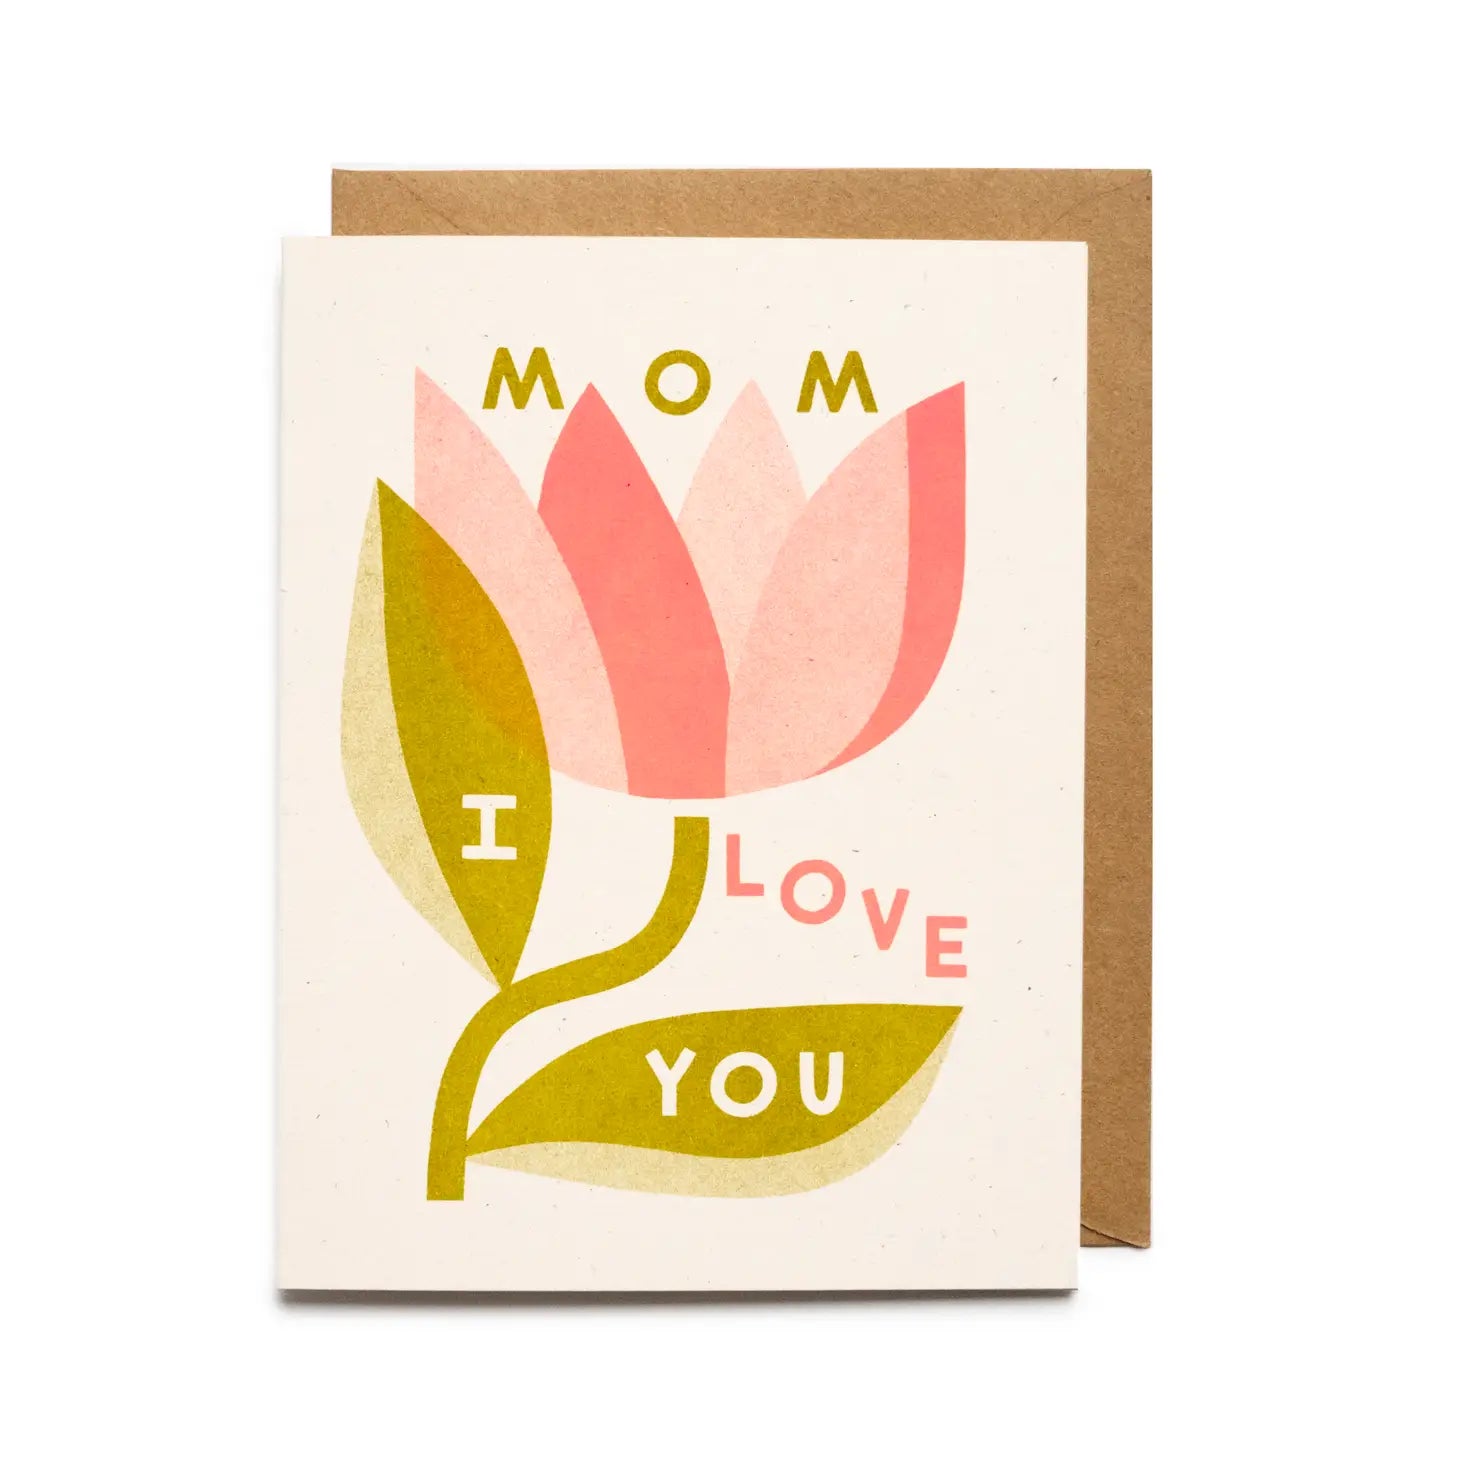 Cream white card. Green, pink, and white text reads "mom I love you." Pink and green flower drawing.